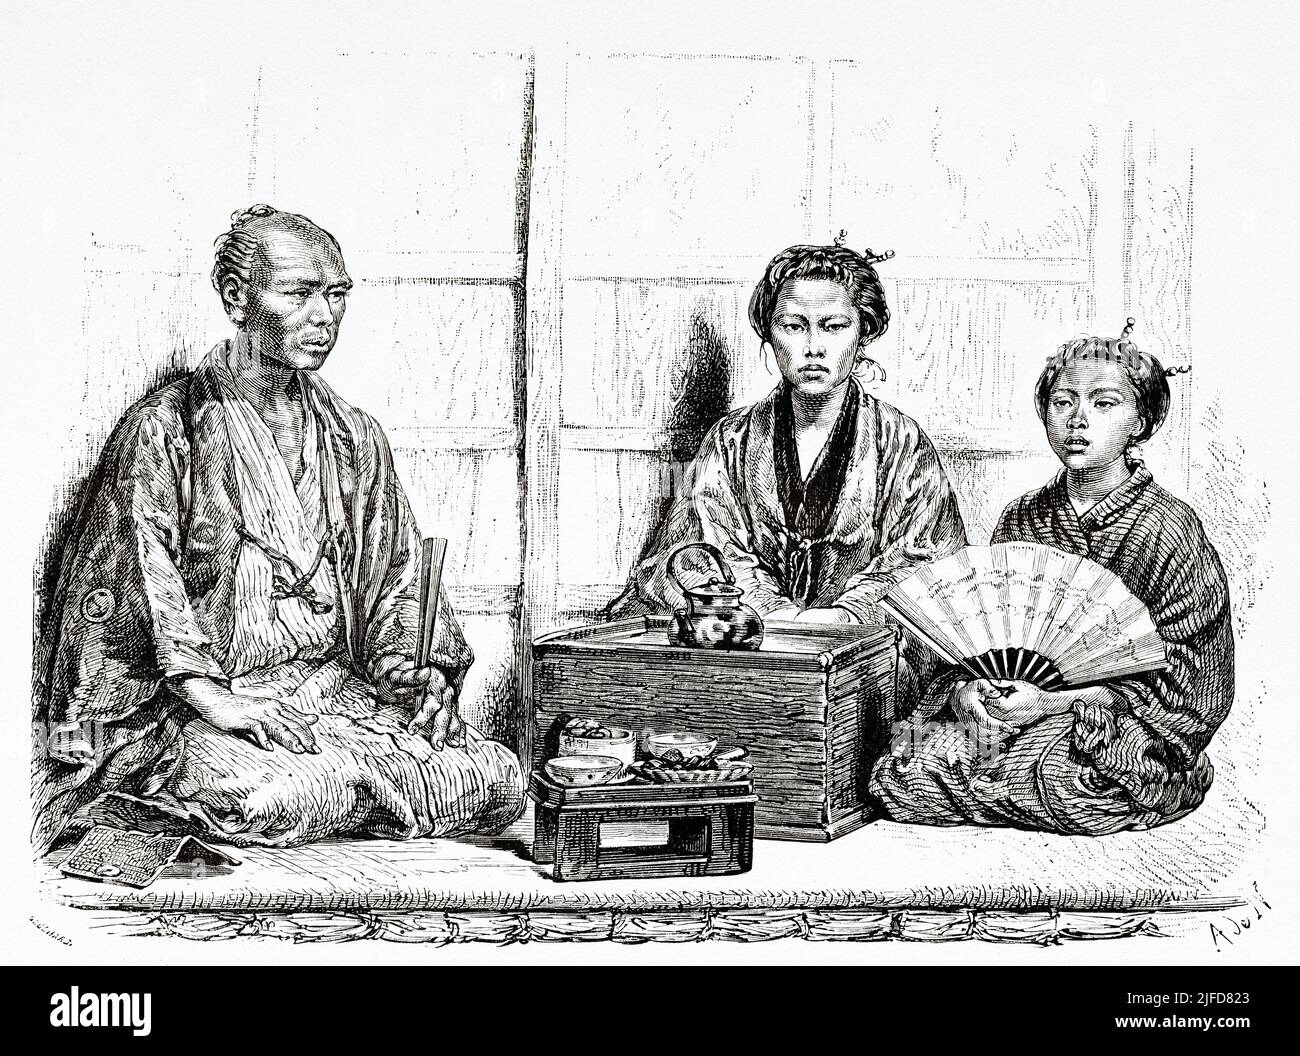 Craftsmen class family having tea, Tokyo. Japan, Asia. Journey to Japan by Aime Humbert 1863-1864 from Le Tour du Monde 1867 Stock Photo